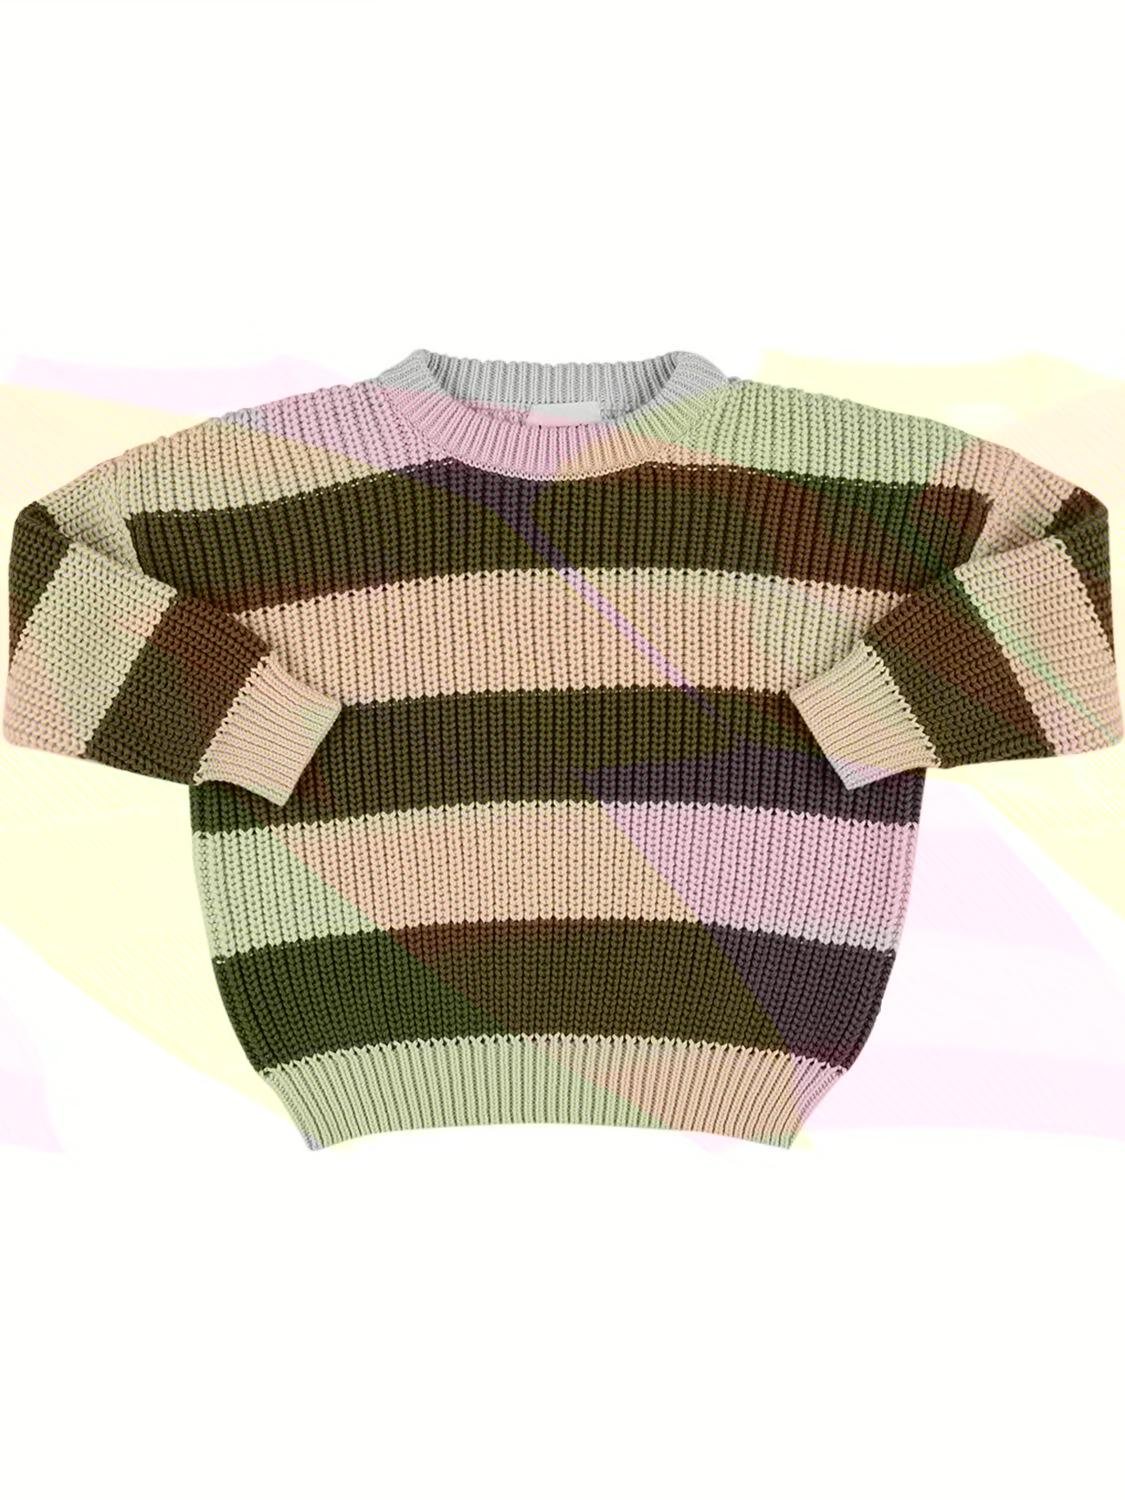 Organic Cotton Knit Sweater by THE NEW SOCIETY